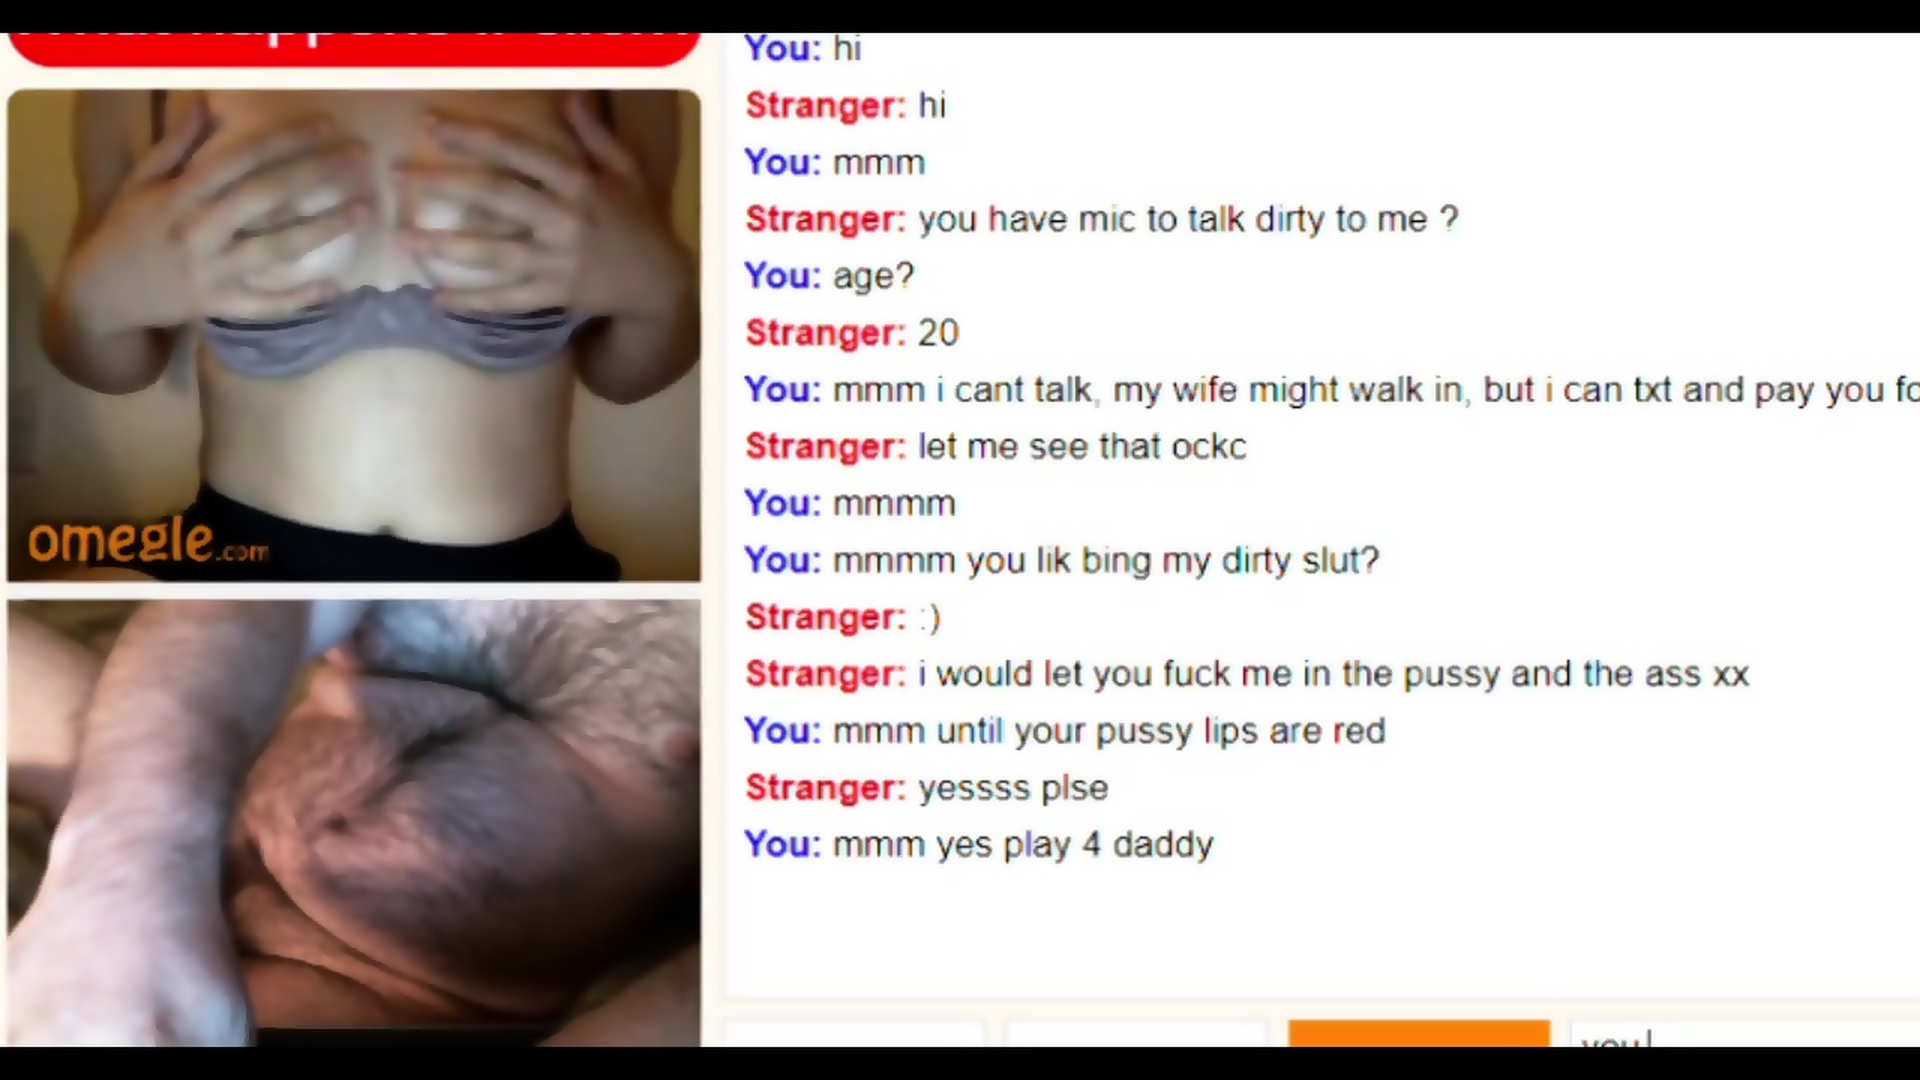 Omegle Quickie 6 20 Year Old With Hairy Pussy Loves To Get Off With Me pic